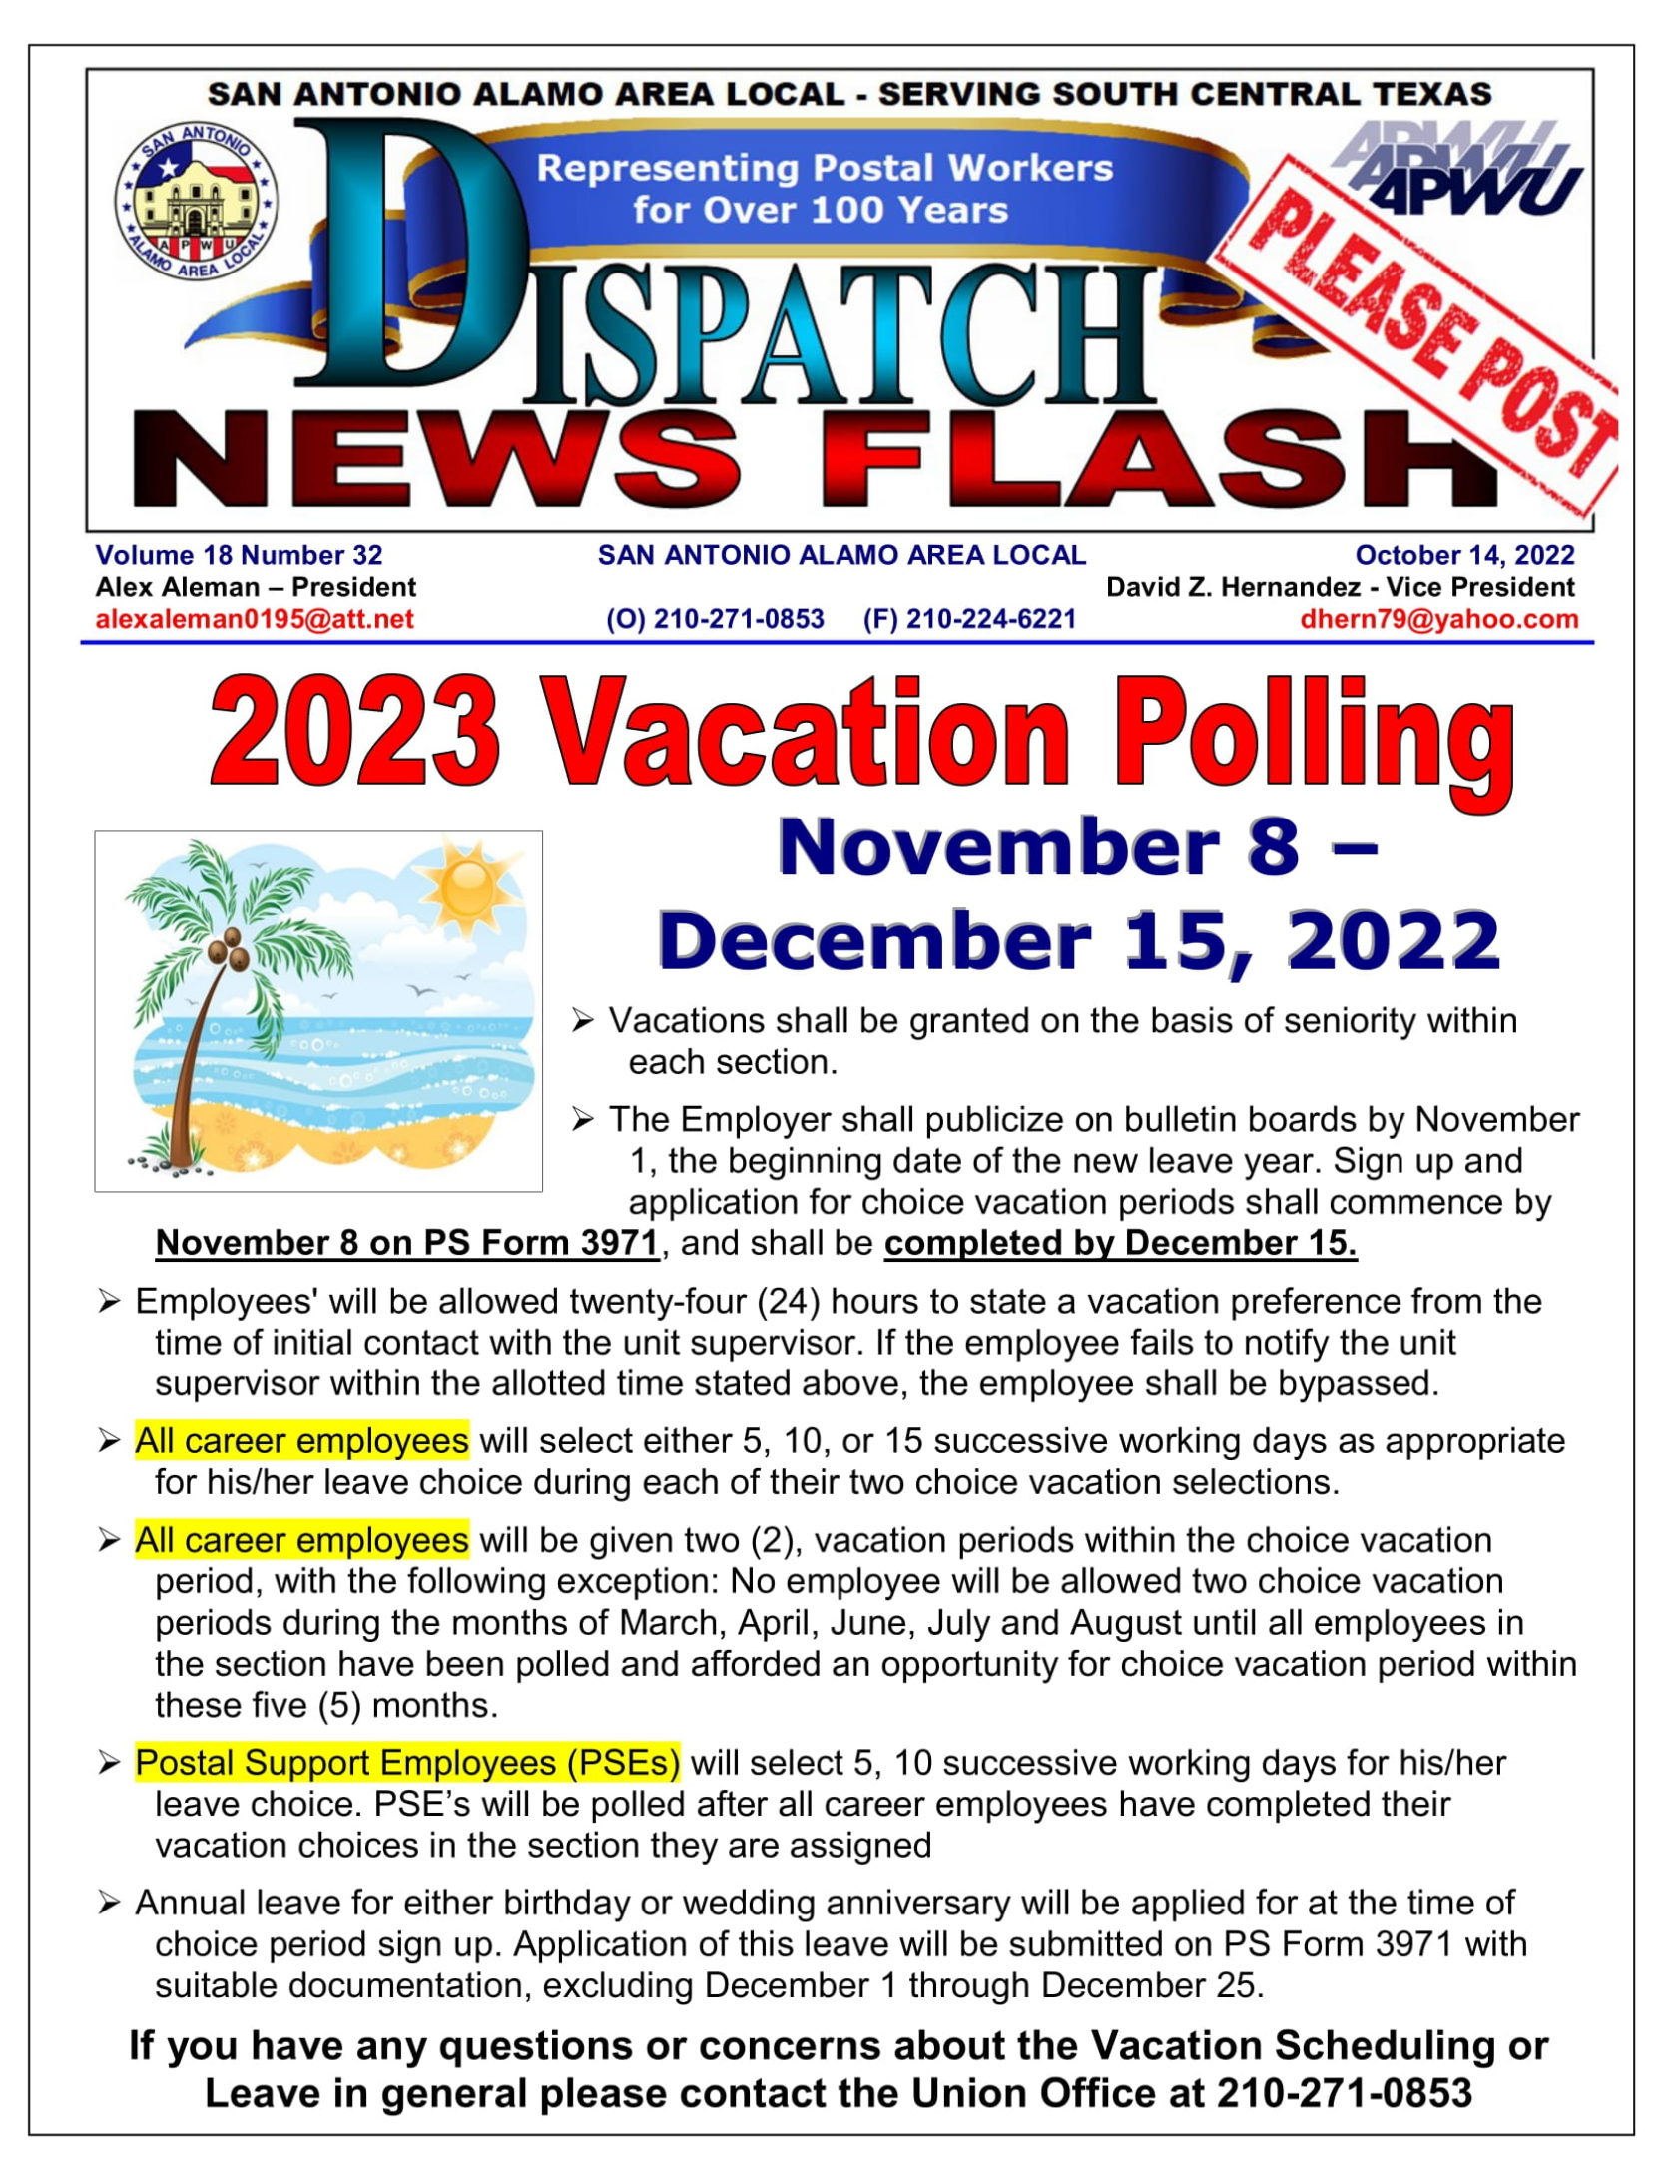 2023 Vacation Polling - 